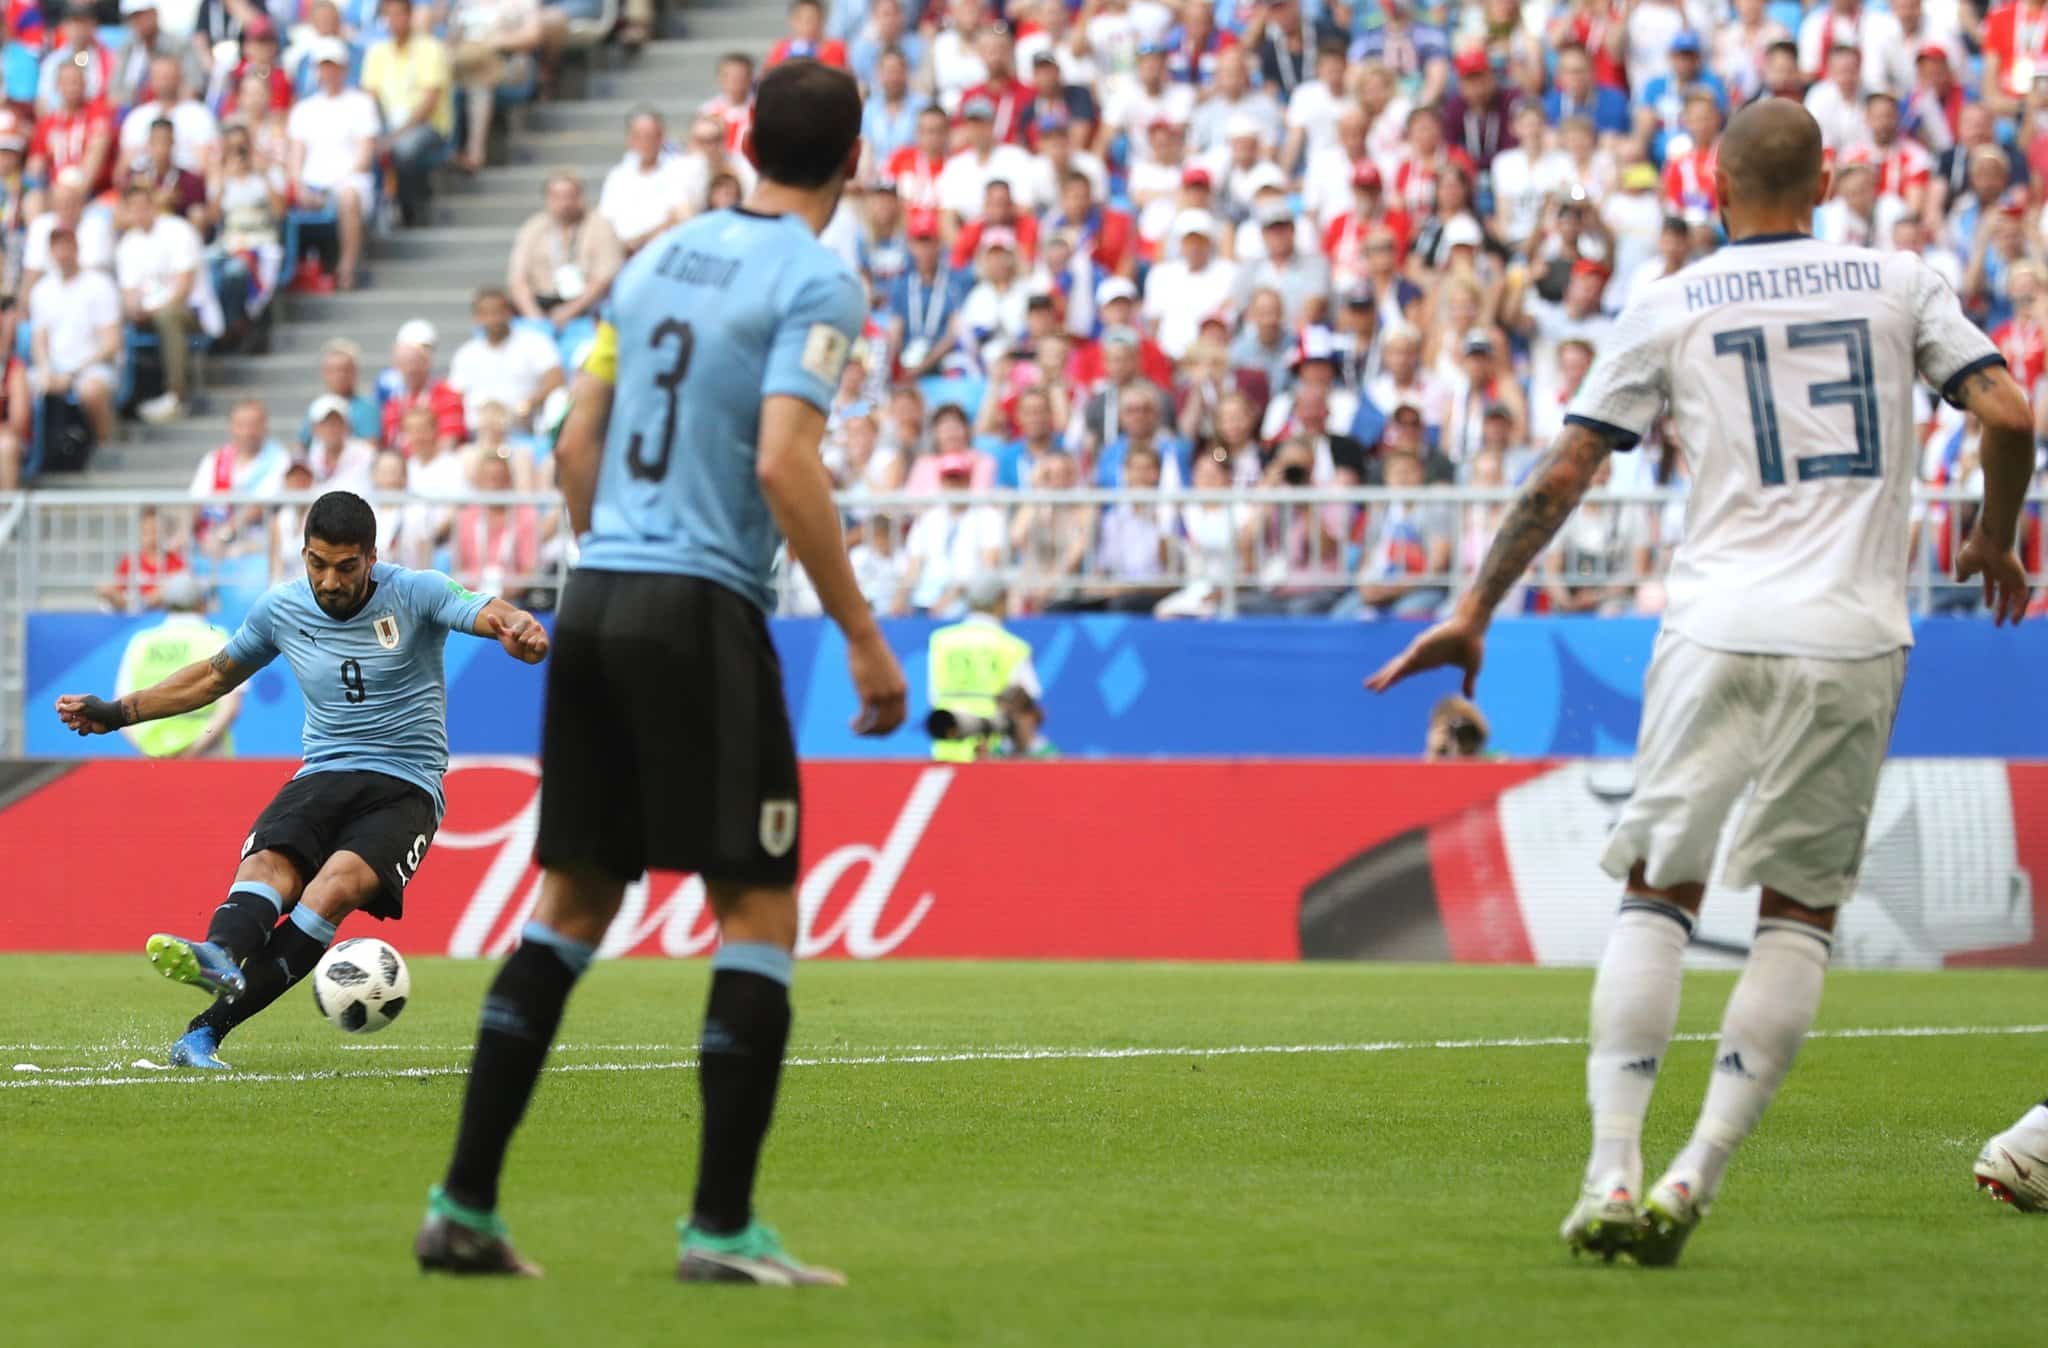 You are currently viewing Highlights: Uruguay thrash Russia to claim top spot